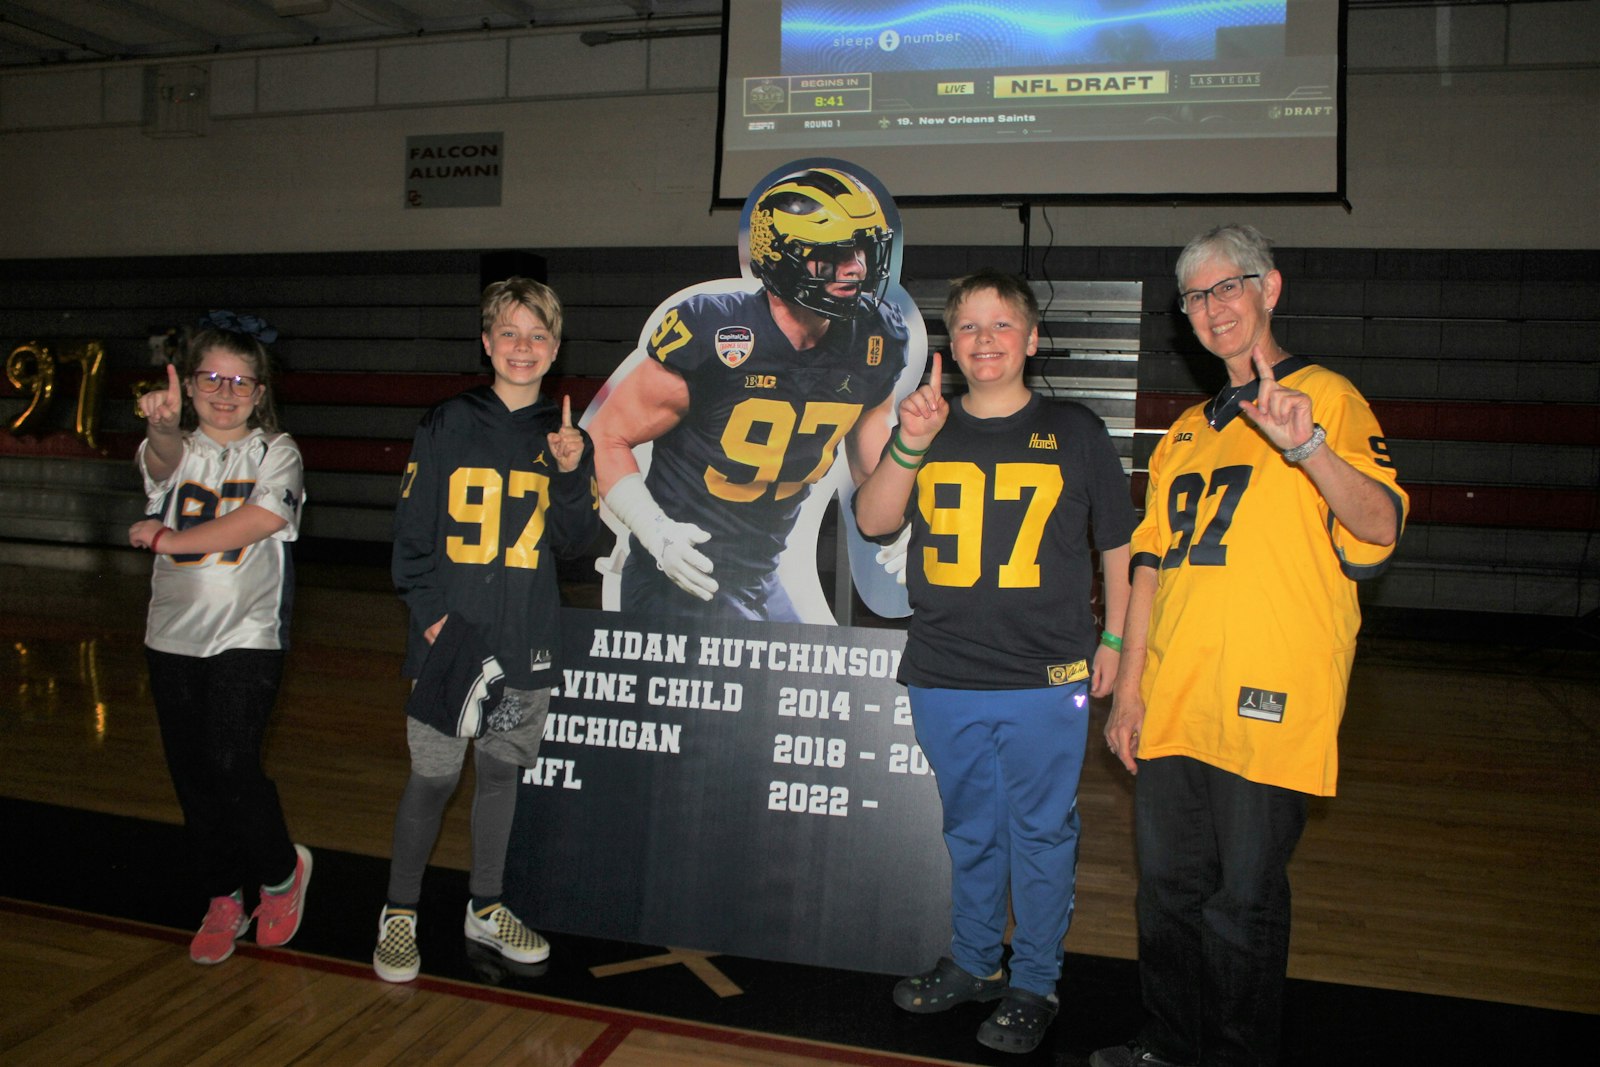 Superfans Monroe Mark of Divine Child, Sam Grezlik and Griffin Gardner from Our Lady of Good Counsel, and Divine Child science teacher Patti Poirer gather around a cardboard standee of Aidan Hutchinson during the NFL Draft Party held at Divine Child High School in Dearborn on April 28. (Wright Wilson | Special to Detroit Catholic)